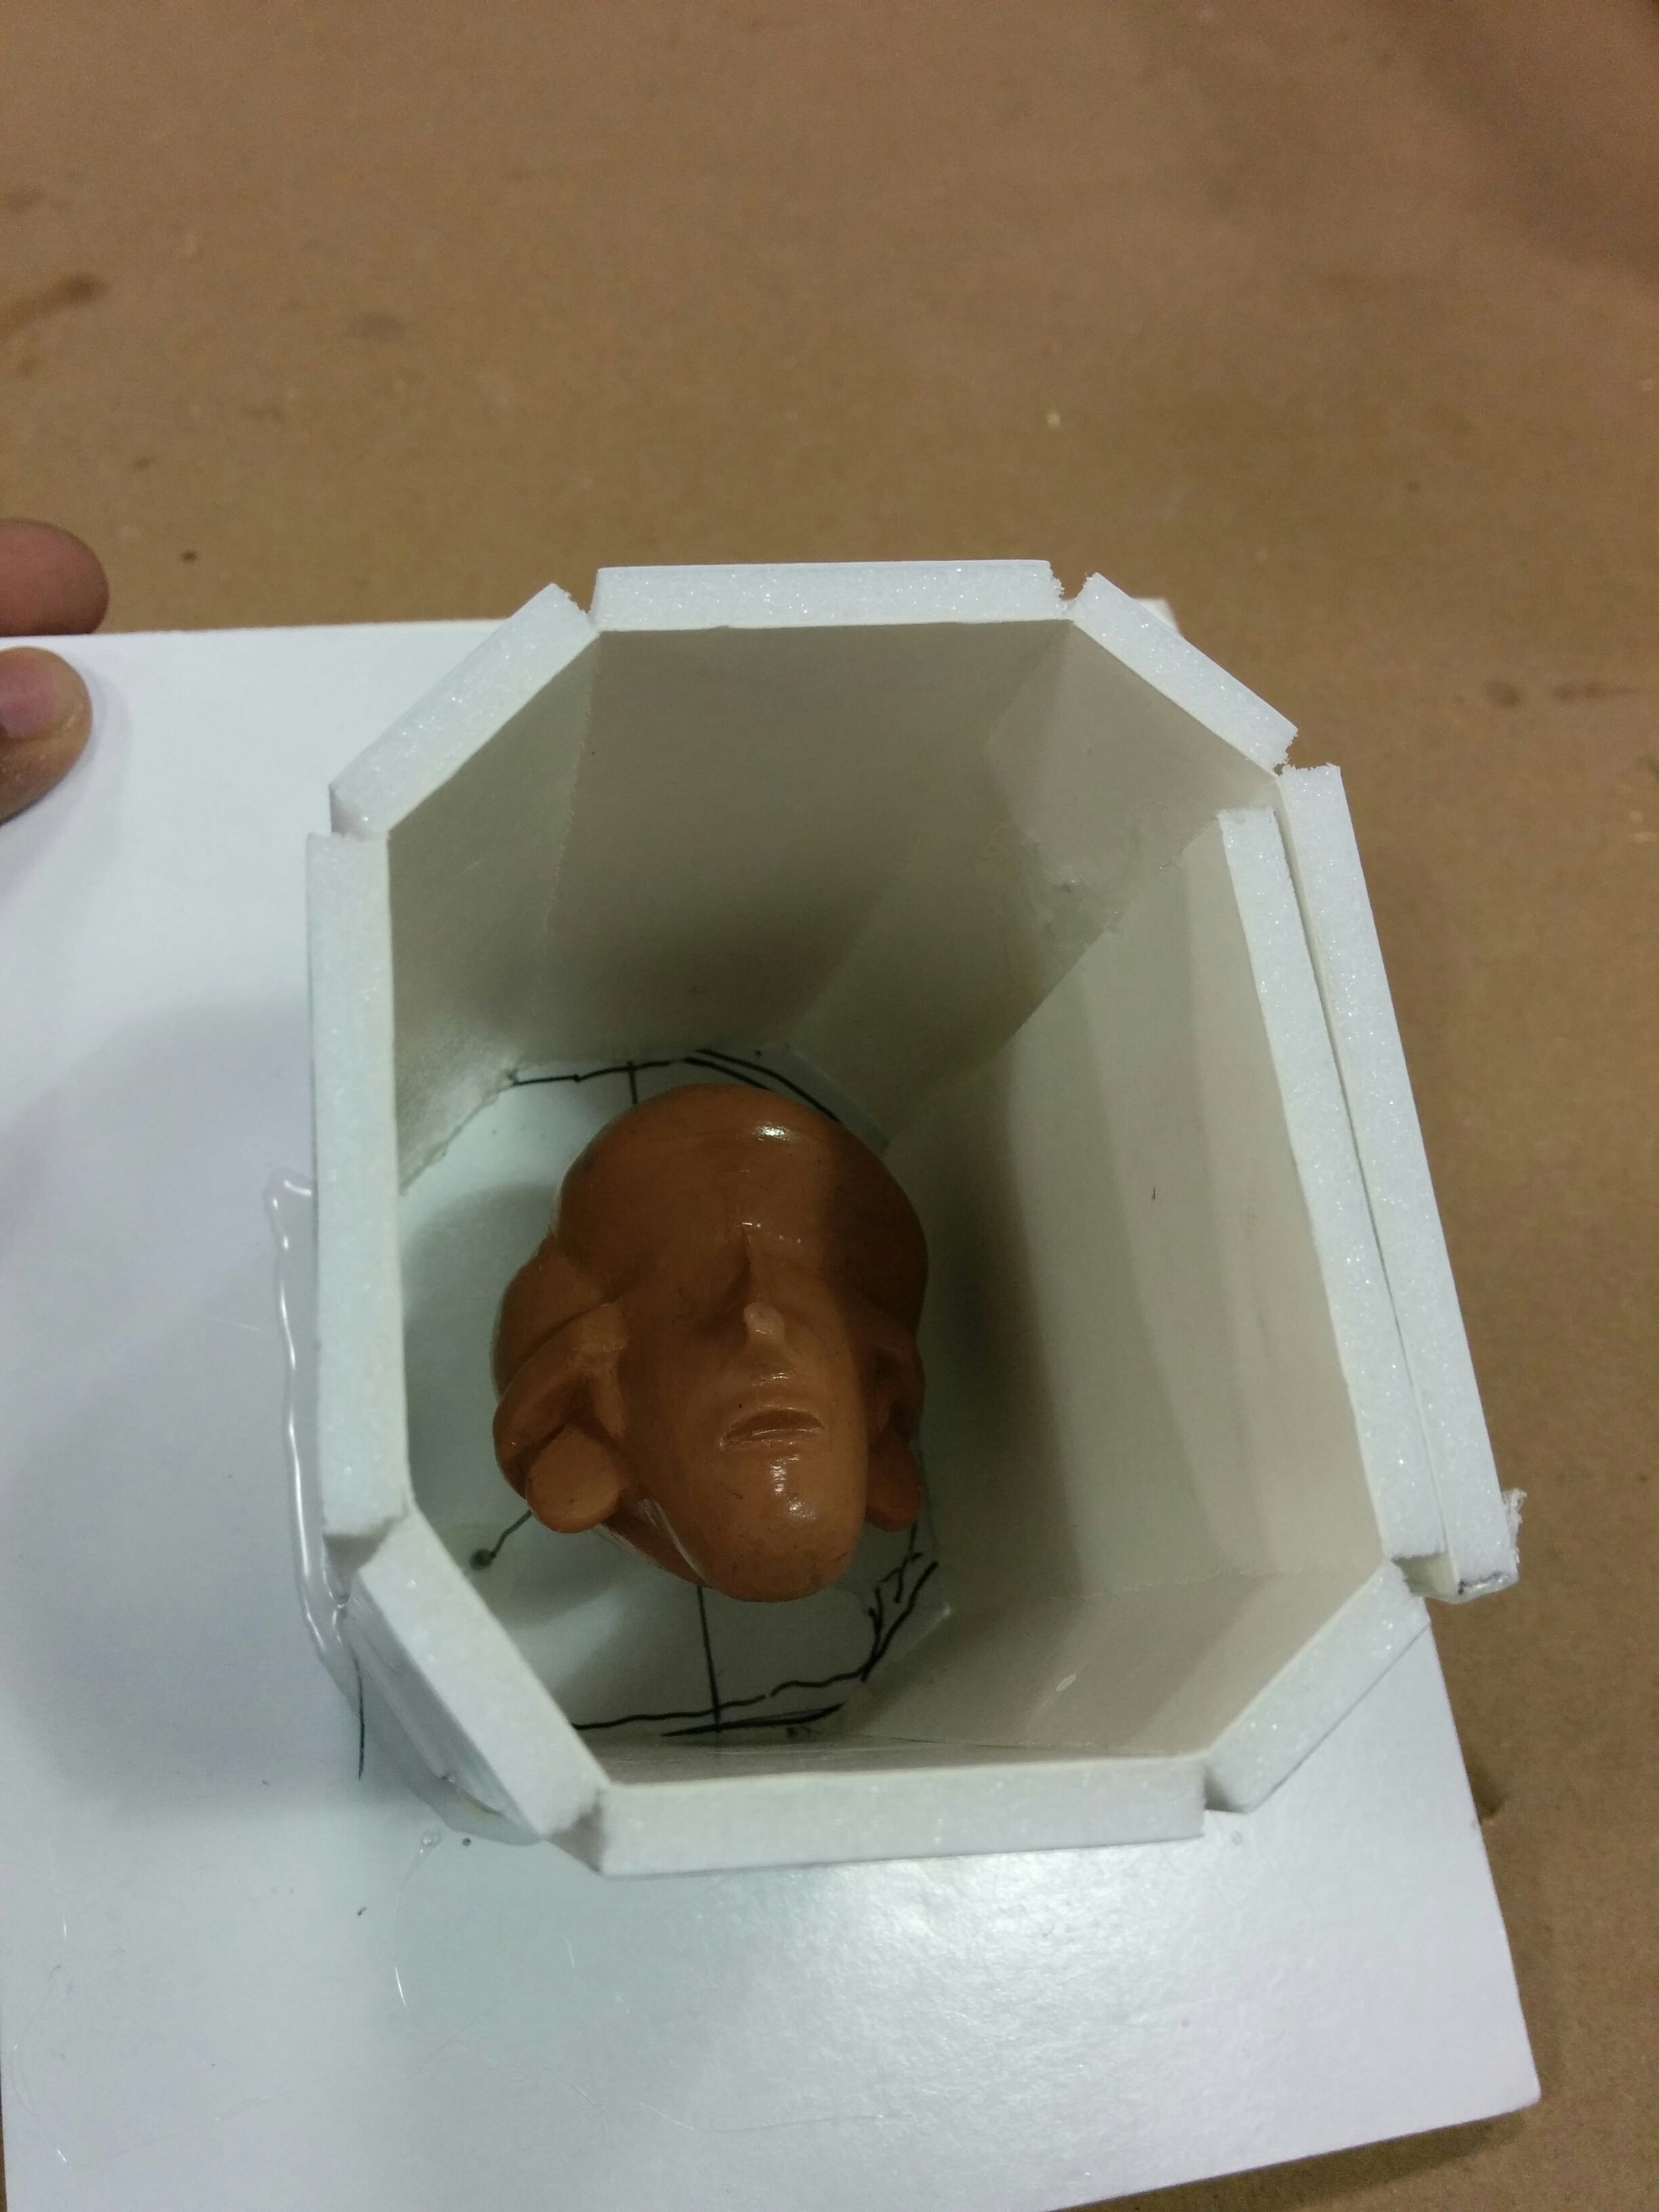  Diver head mold prepped for pouring silicone. The molds were made using a tin based silicone, Gi-1000. 